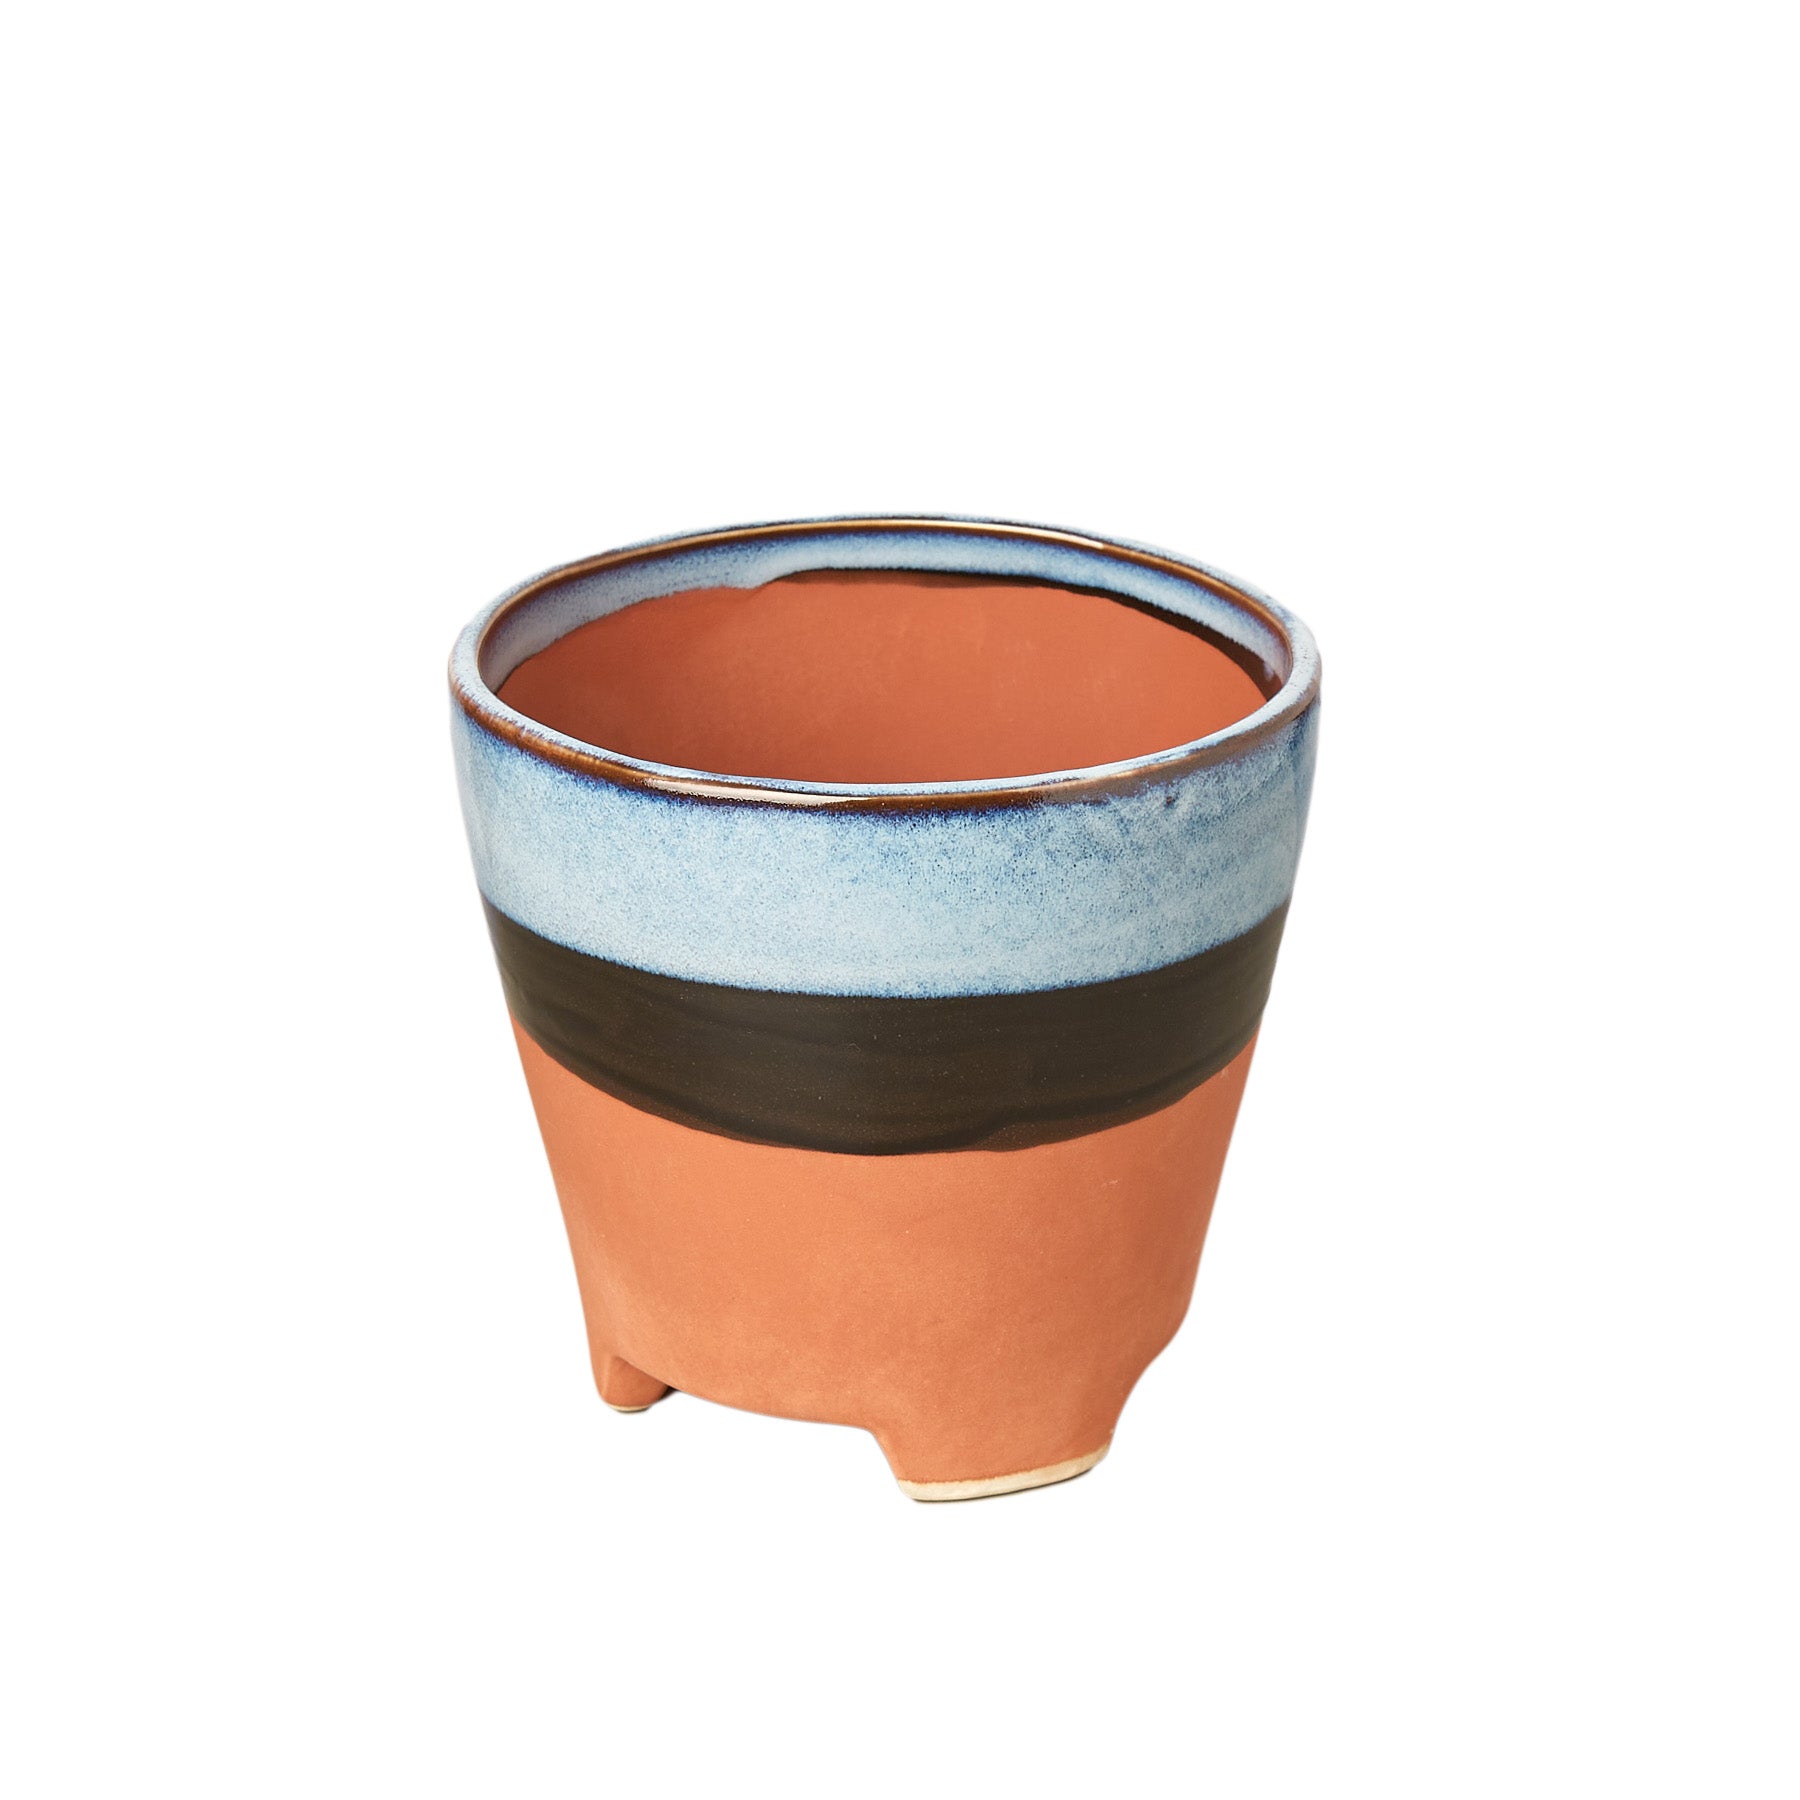 A small pot with a blue, orange and black stripe available at the best garden center near me.